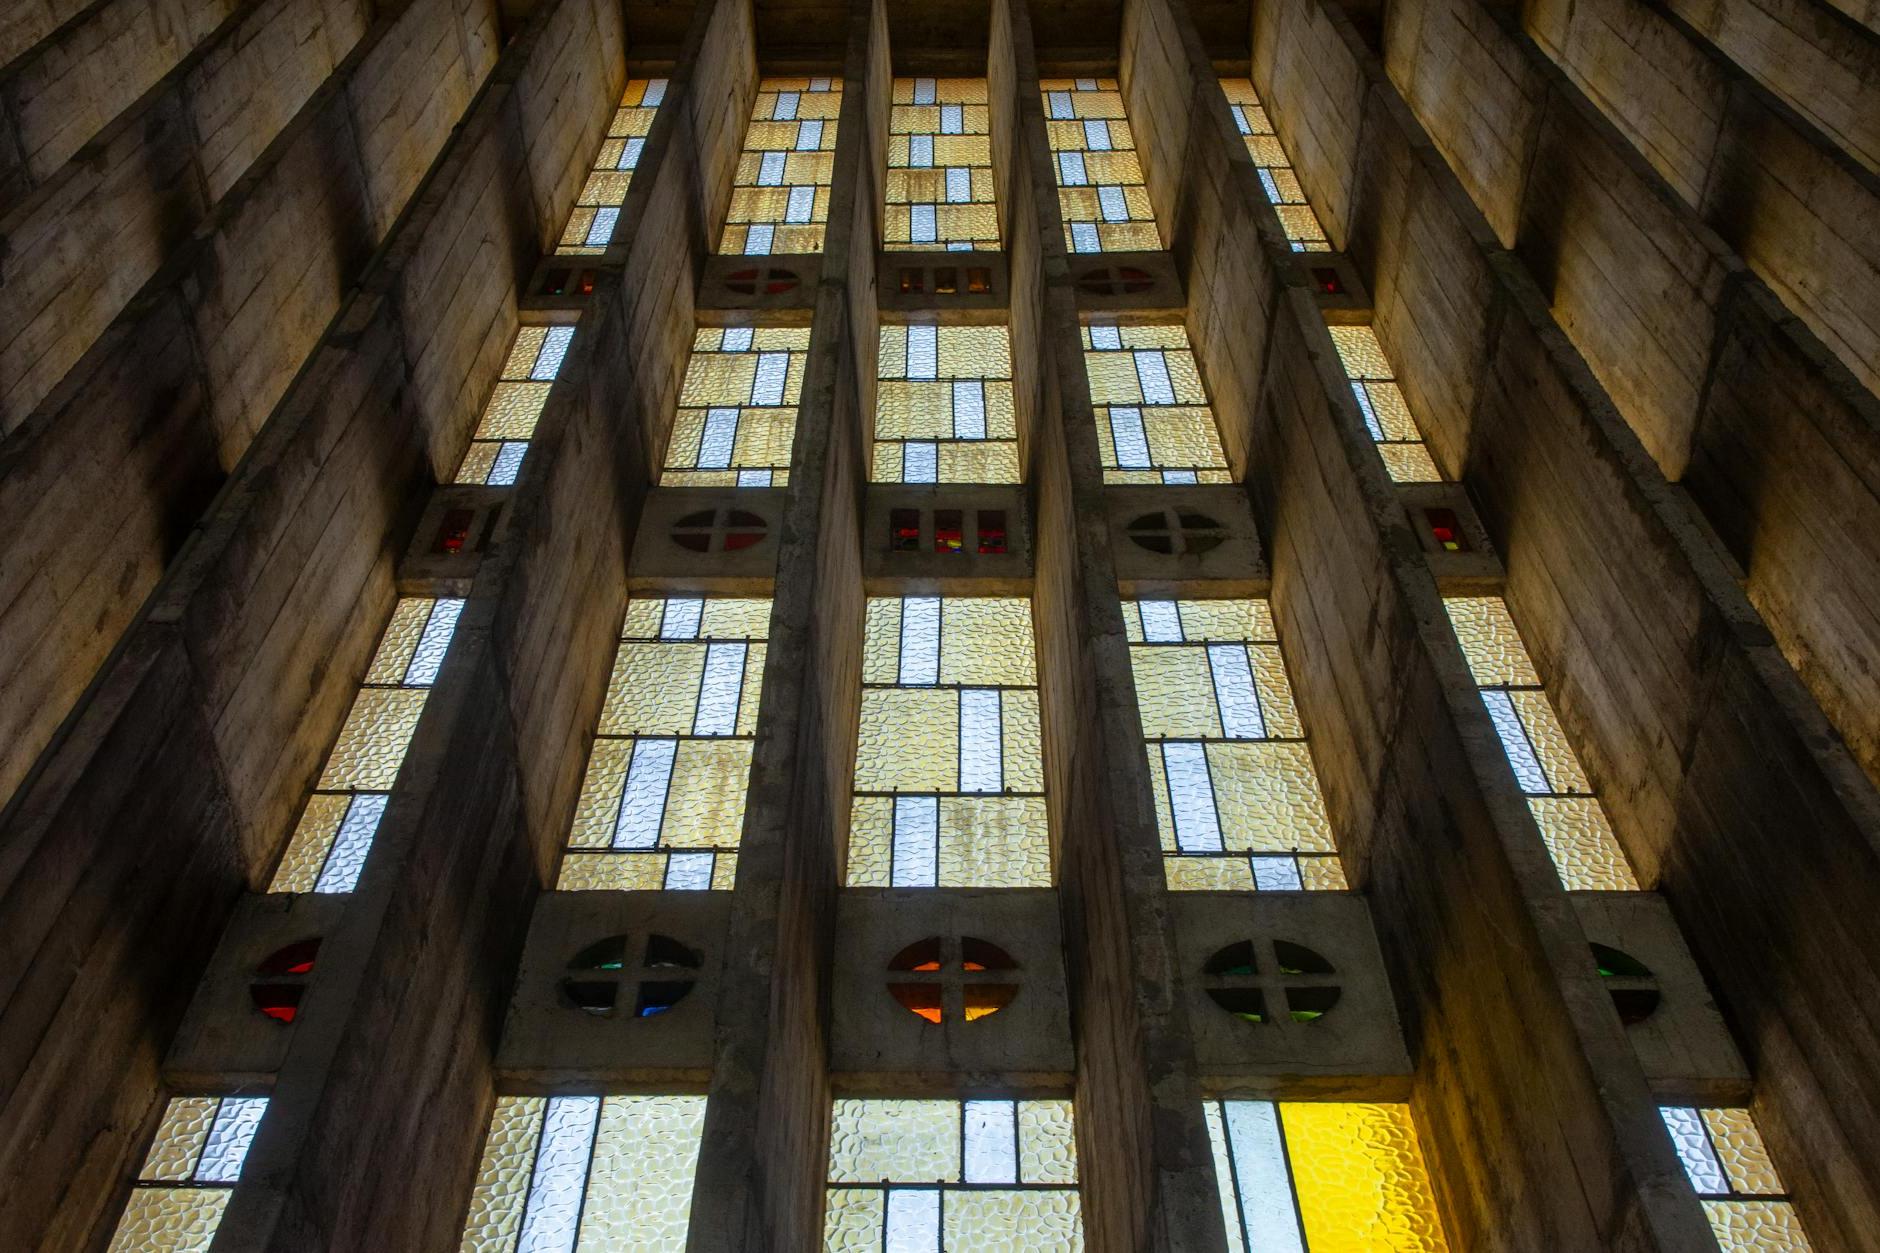 The stained glass windows of a cathedral